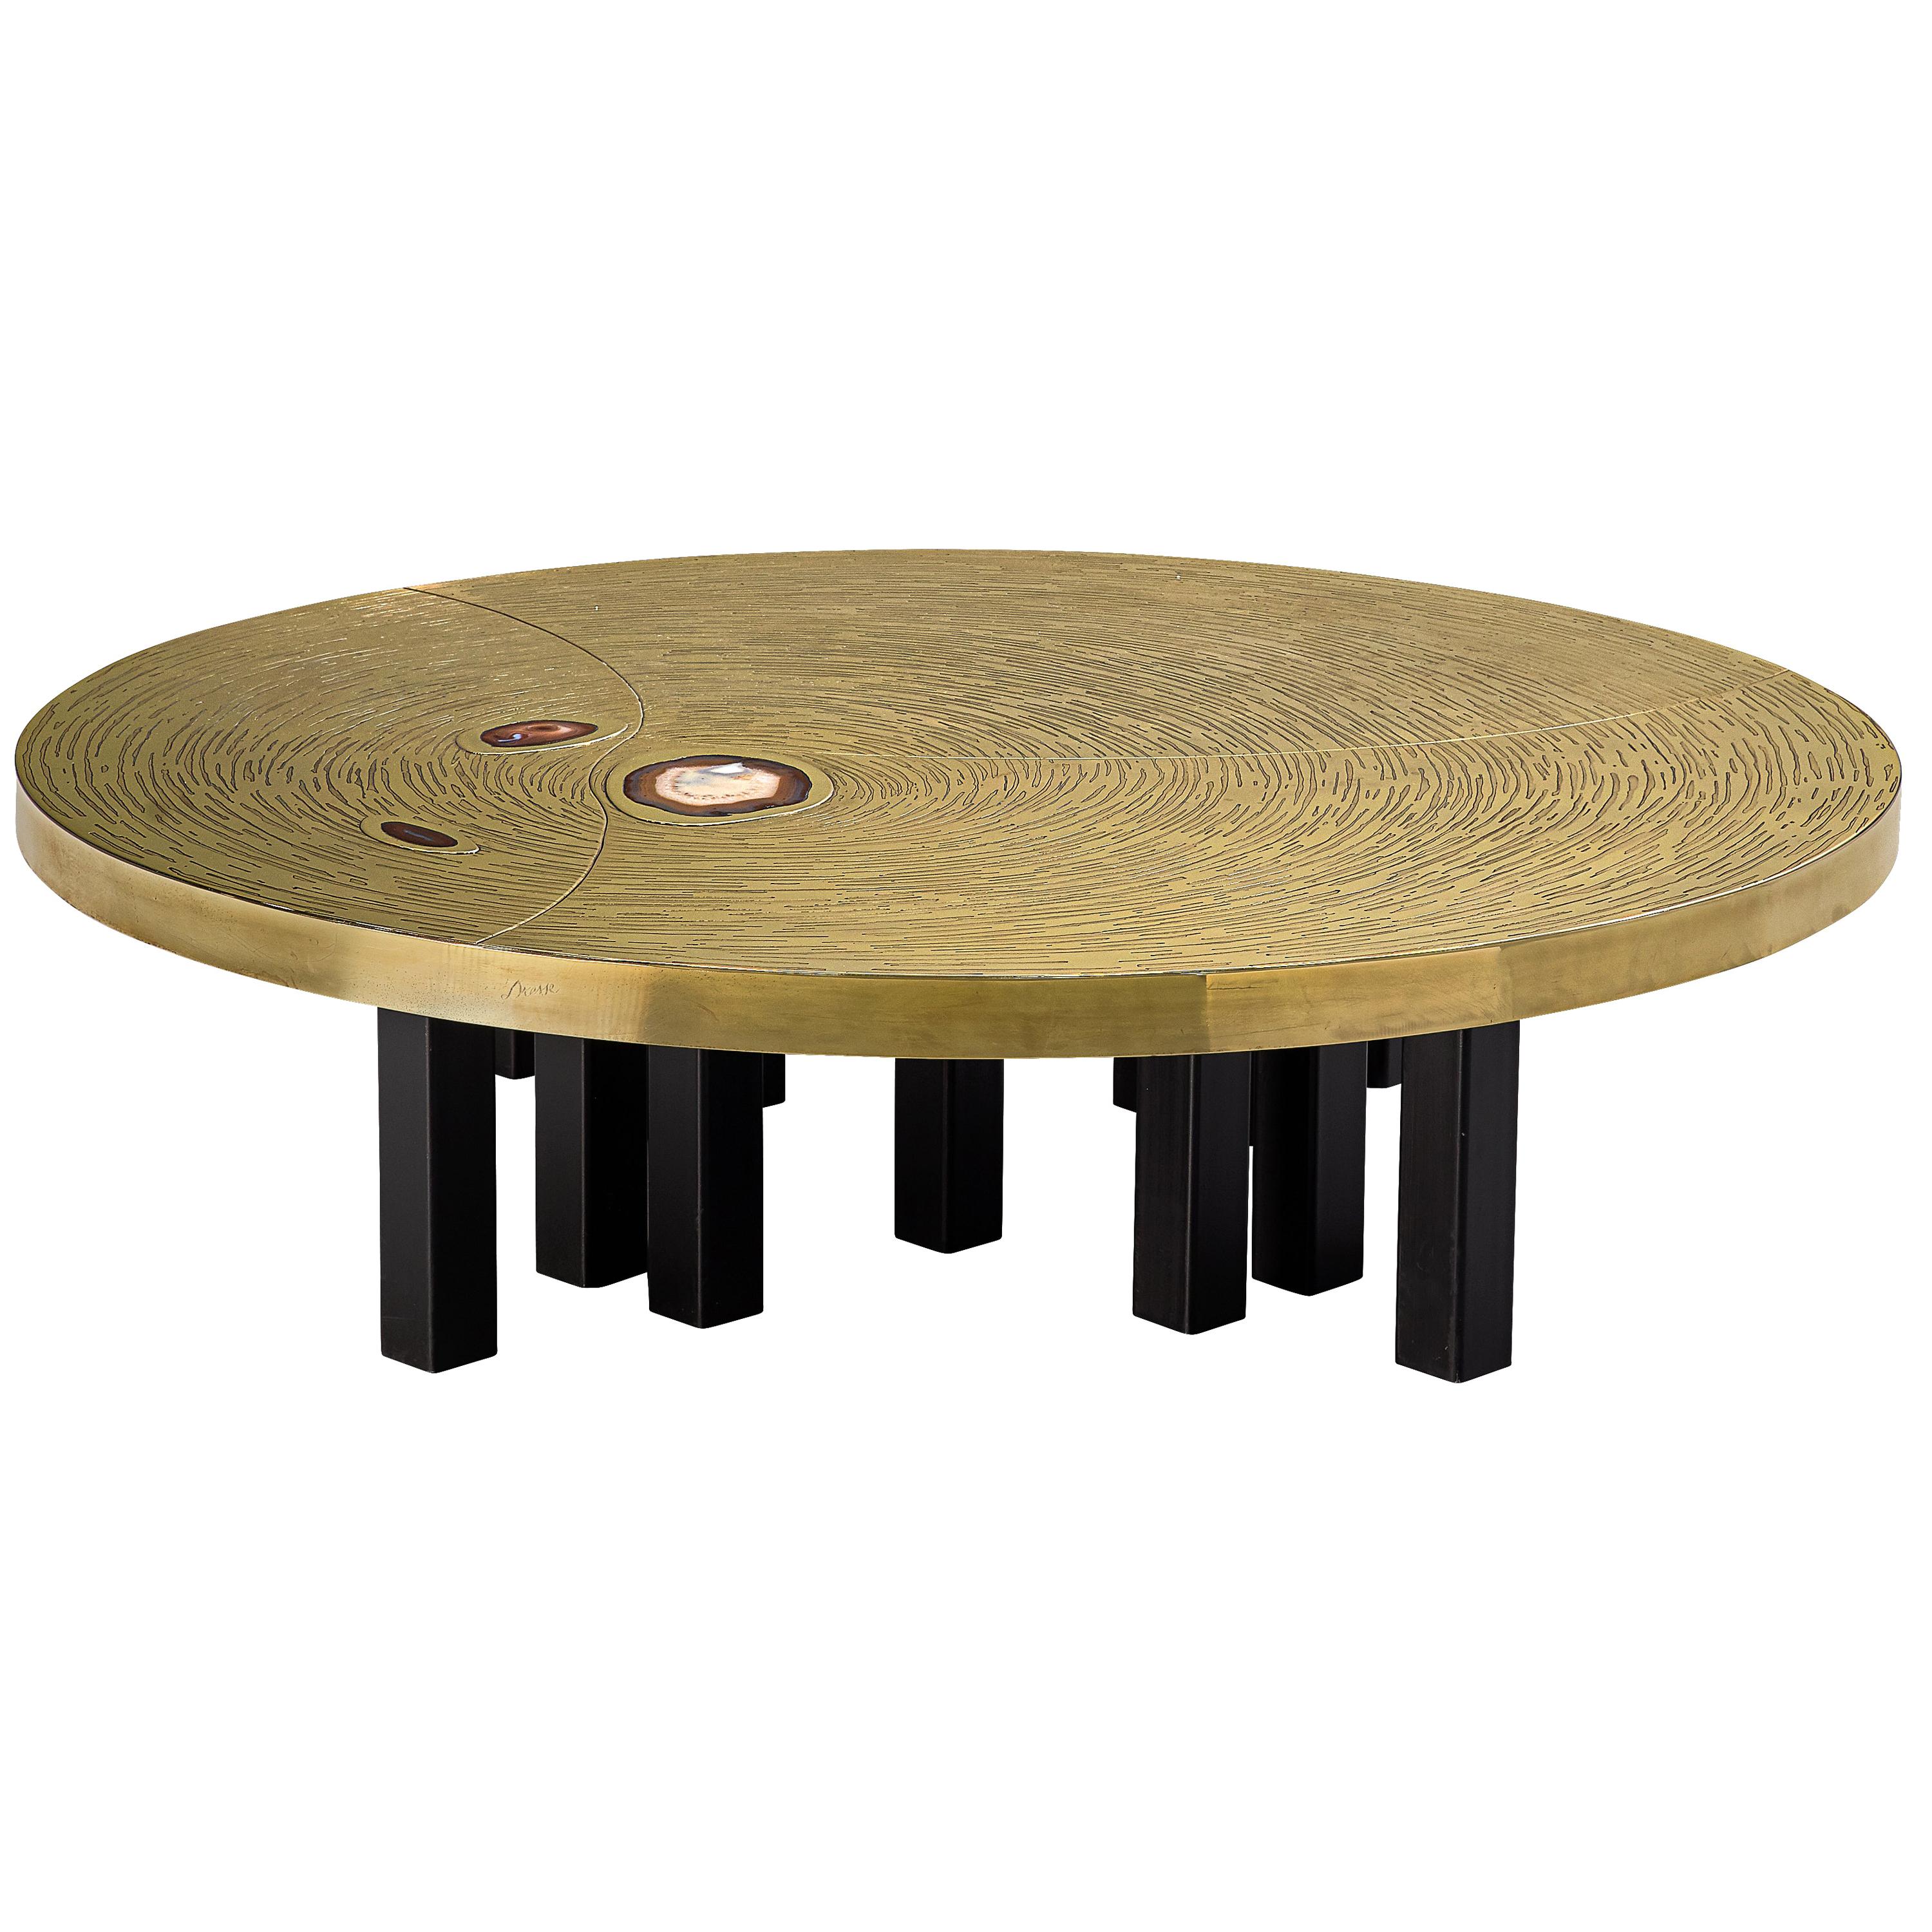 Round Coffee Table in Brass Inlayed with Agate by Jean Claude Dresse